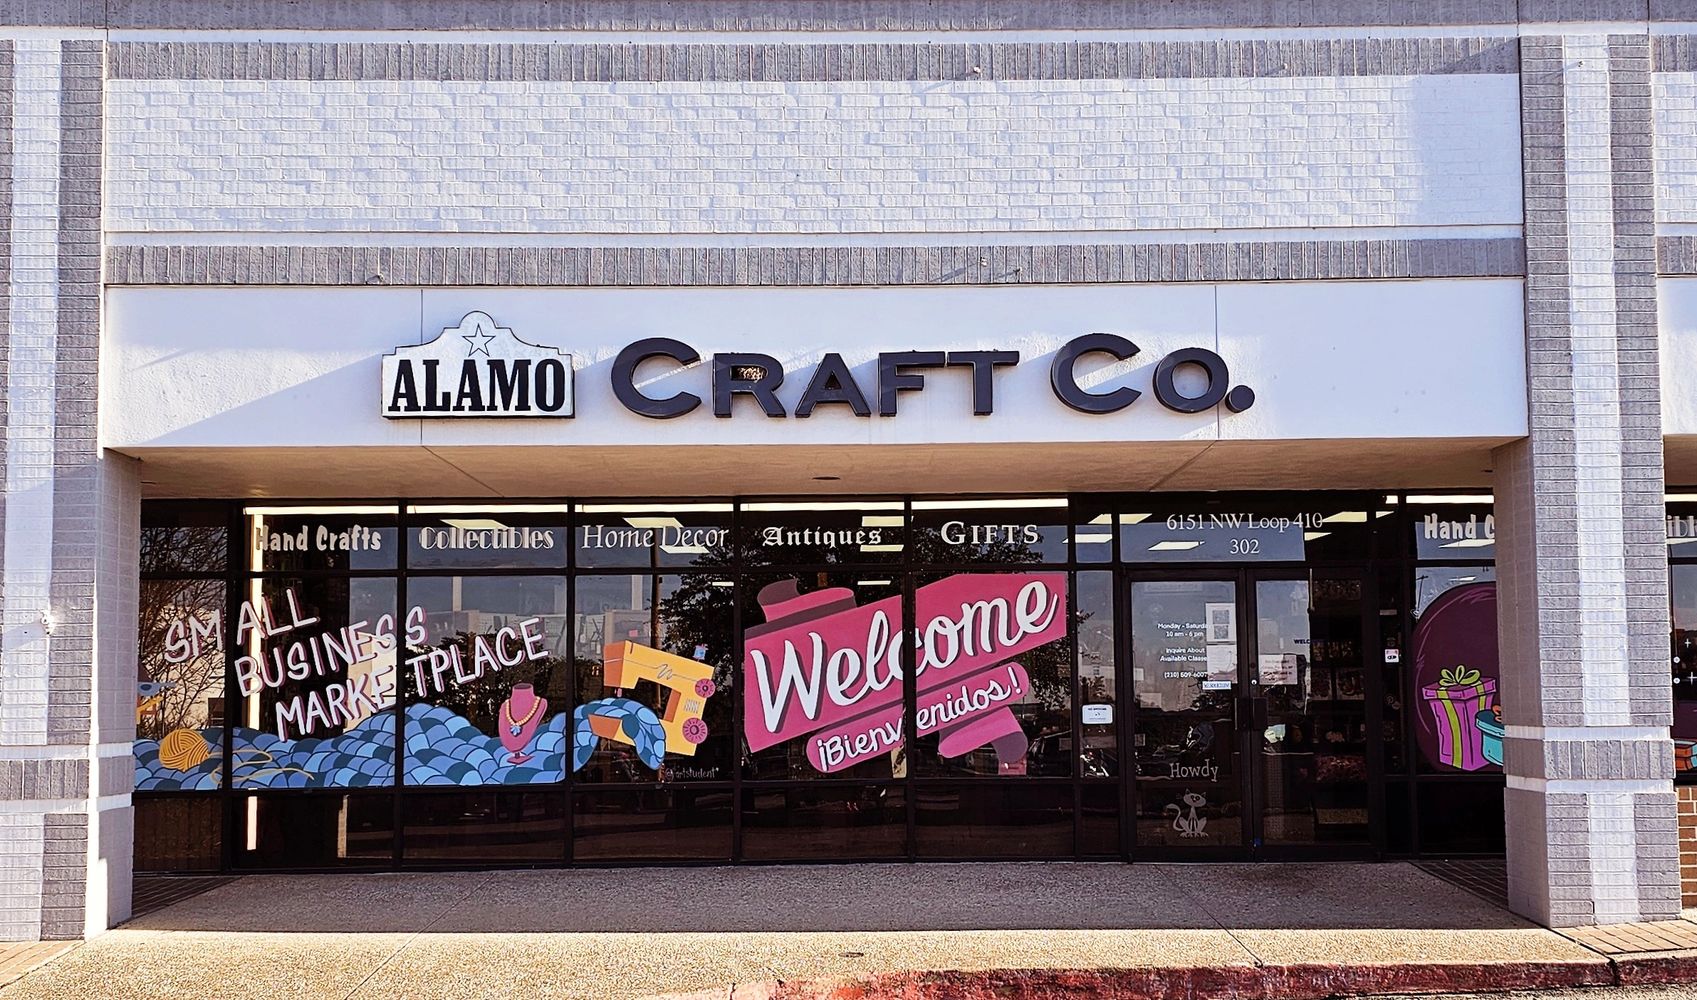 Alamo Craft Company - Hand Crafted Gifts, Antiques, Collectibles